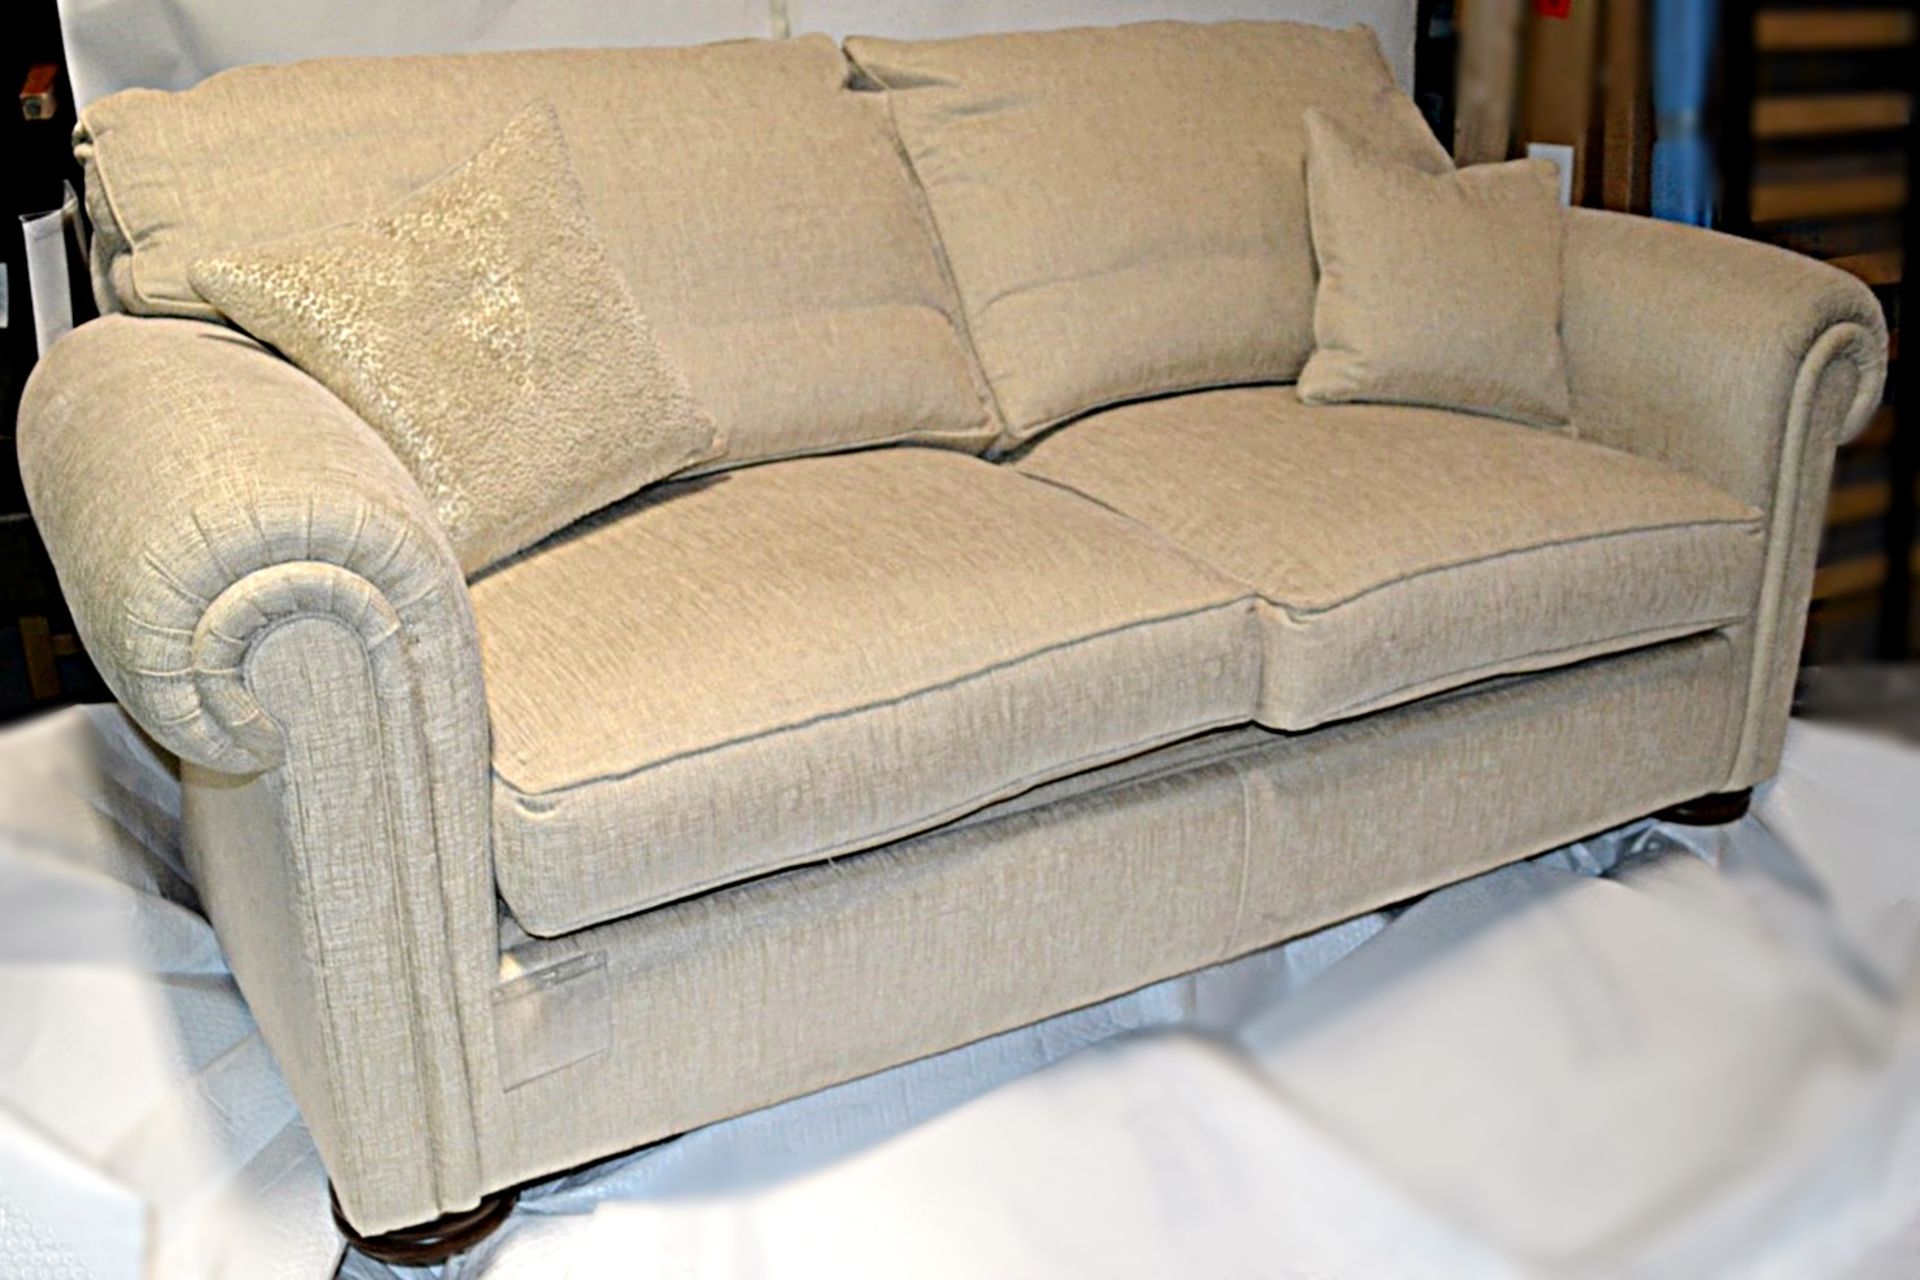 1 x DURESTA Waldorf Zephyr Sofabed With Mattress - Stunning Example In Excellent Condition - Fully - Image 2 of 14